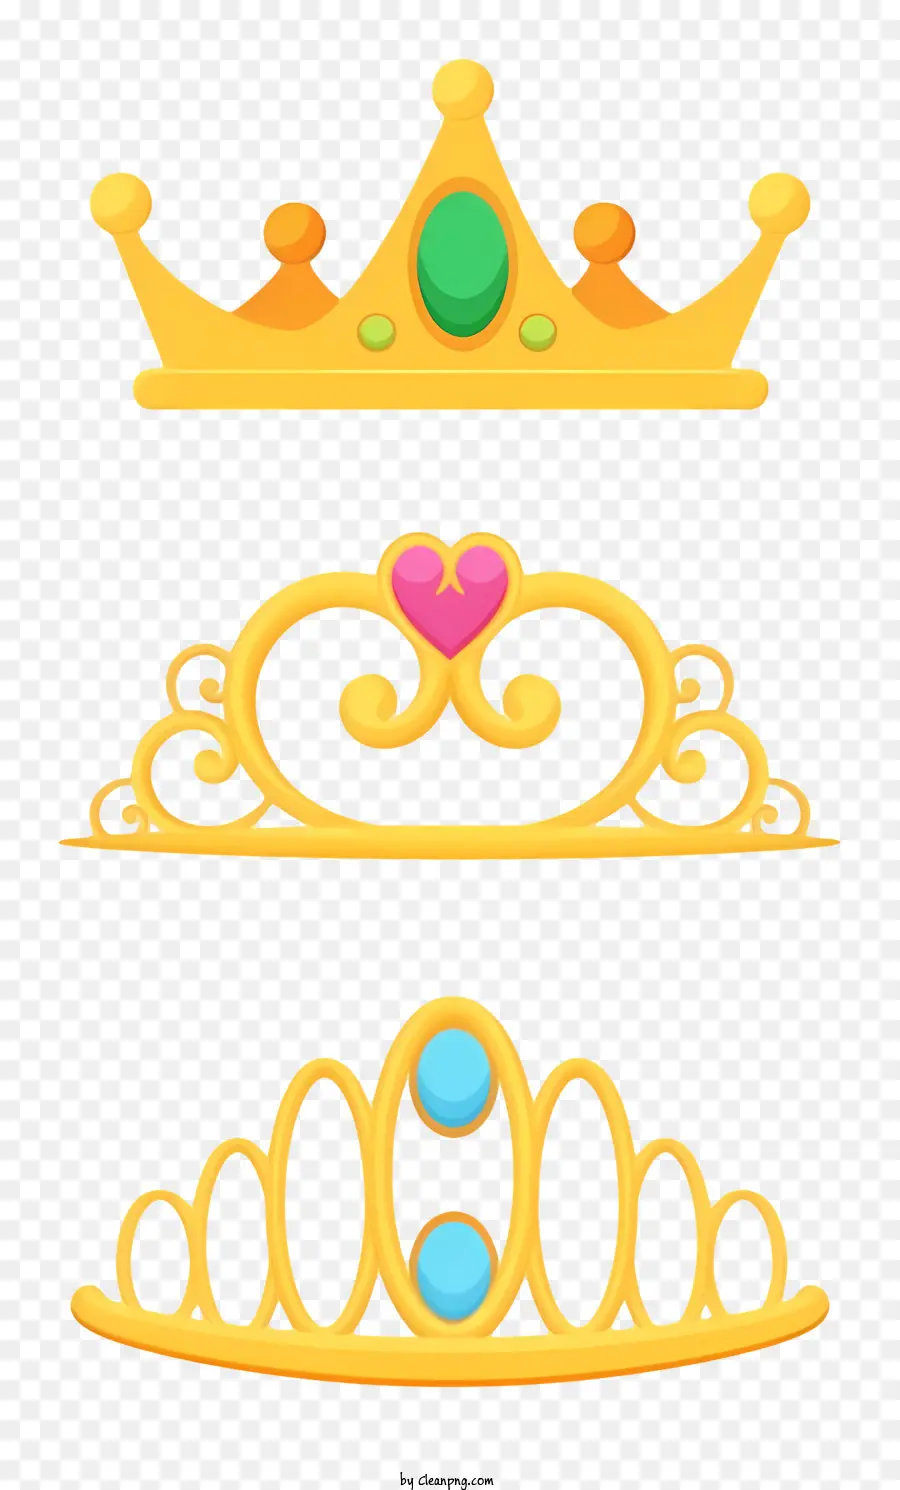 gold crowns jeweled crowns crown shapes crown sizes crown colors